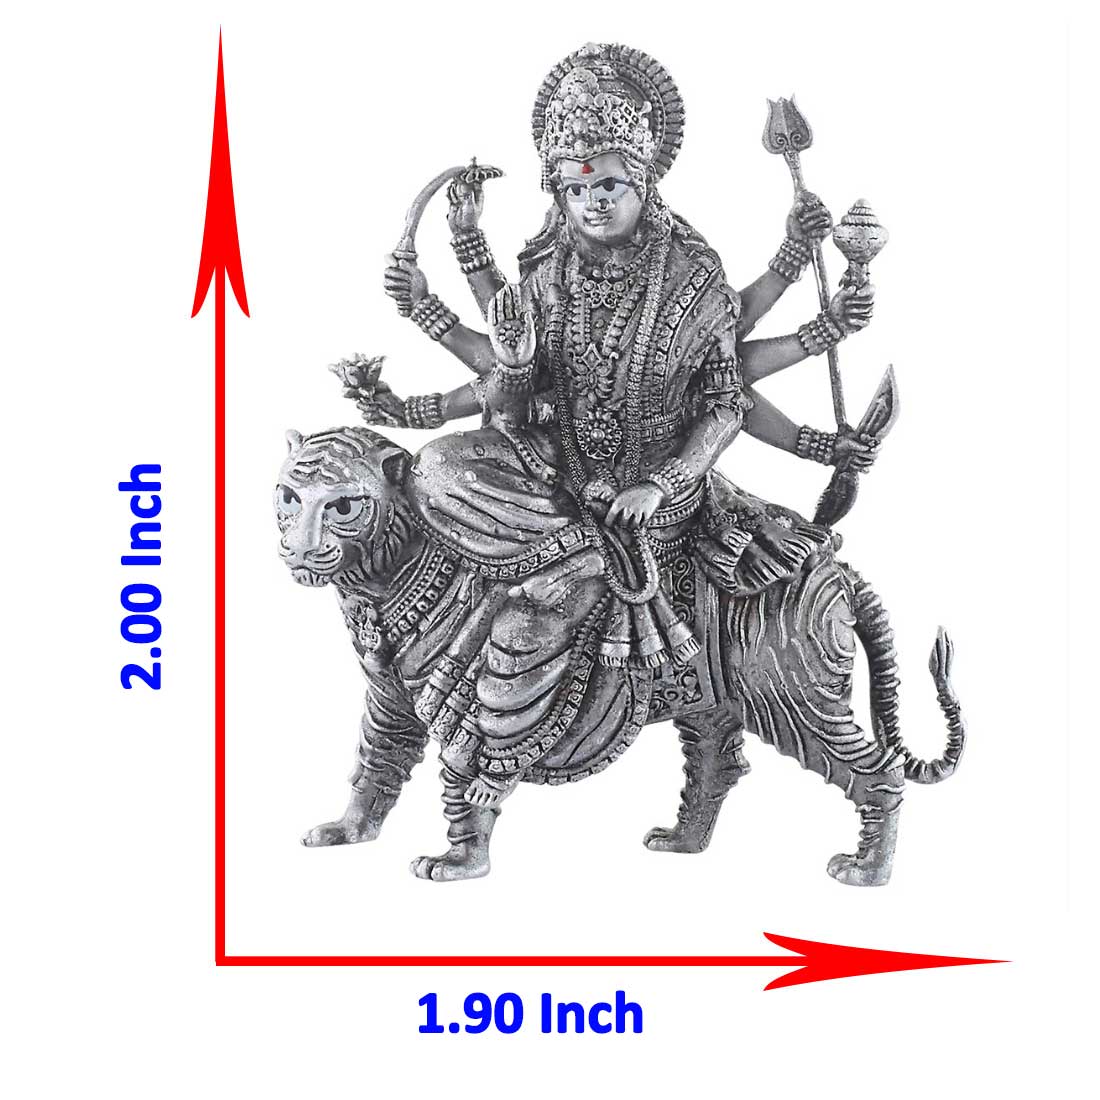 size of maa statue